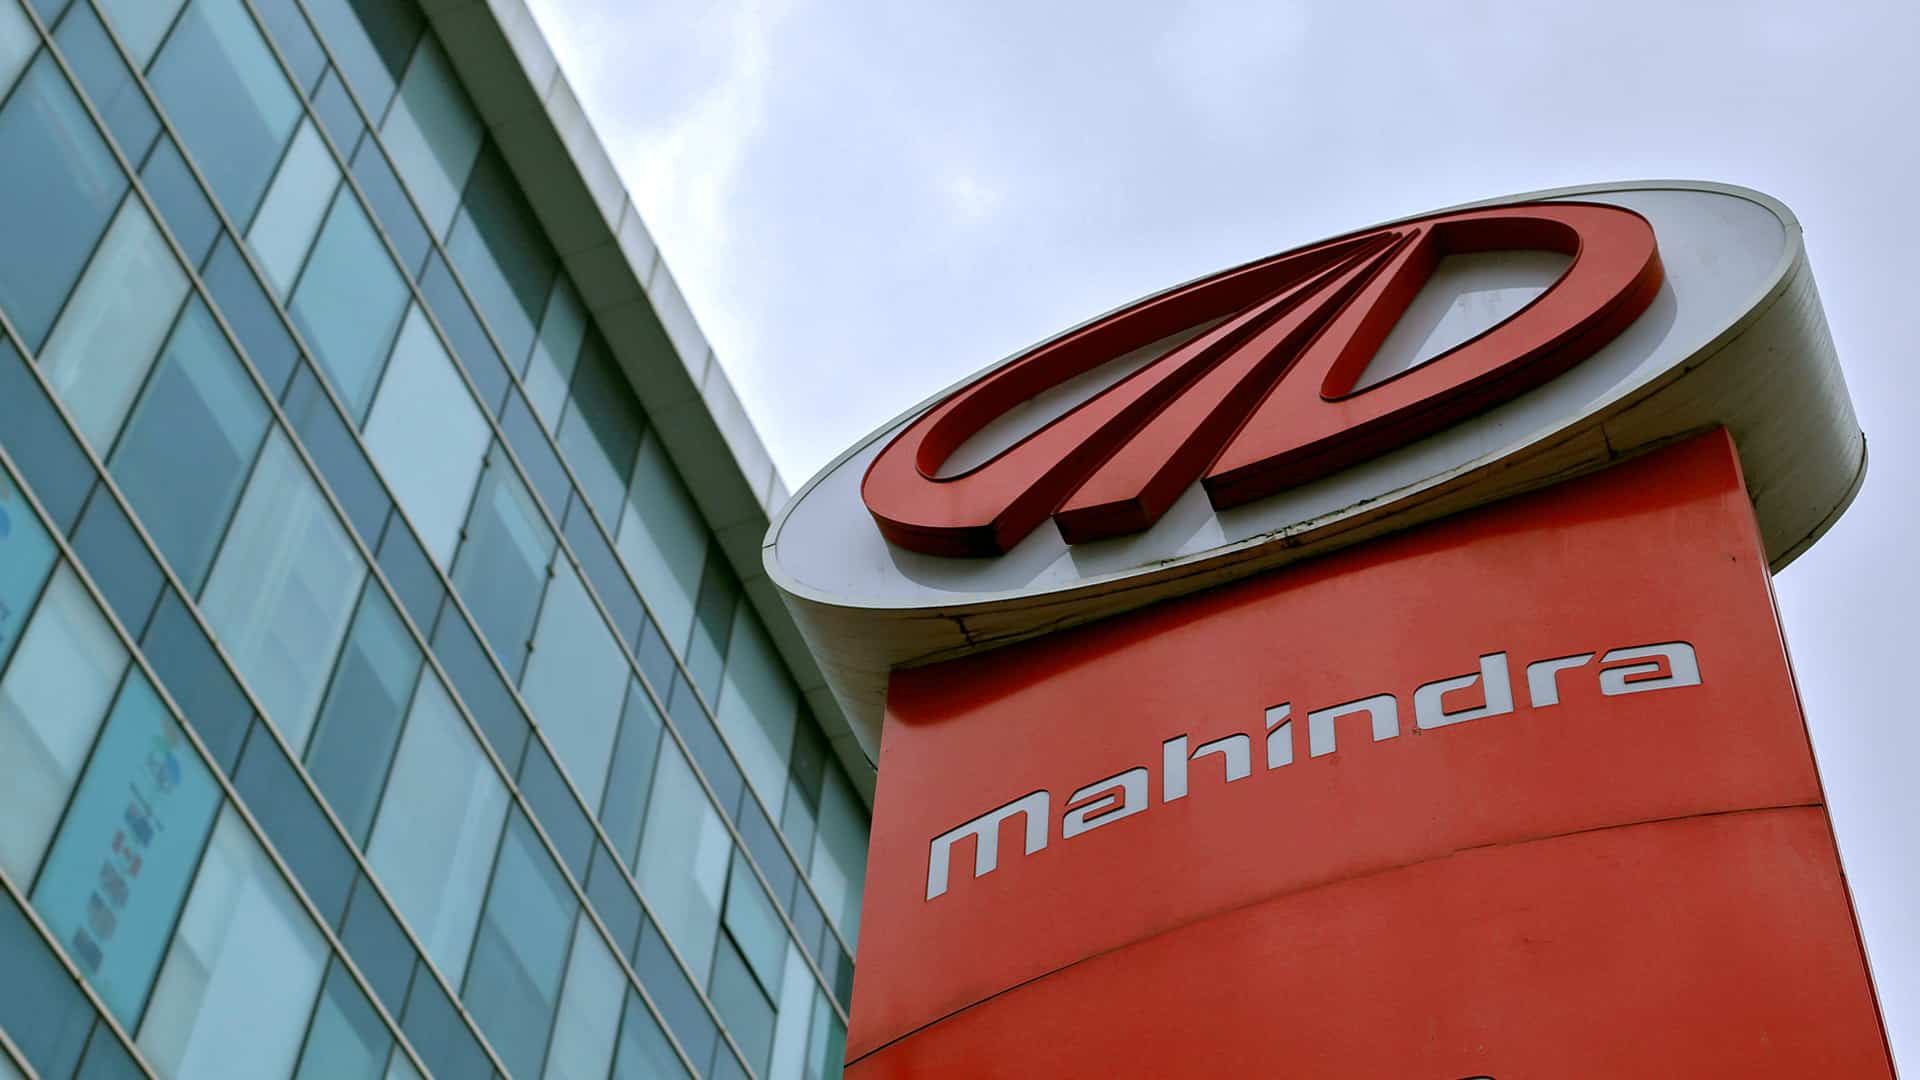 Mahindra Group and British International Investment commit USD 500 million for electric SUV space